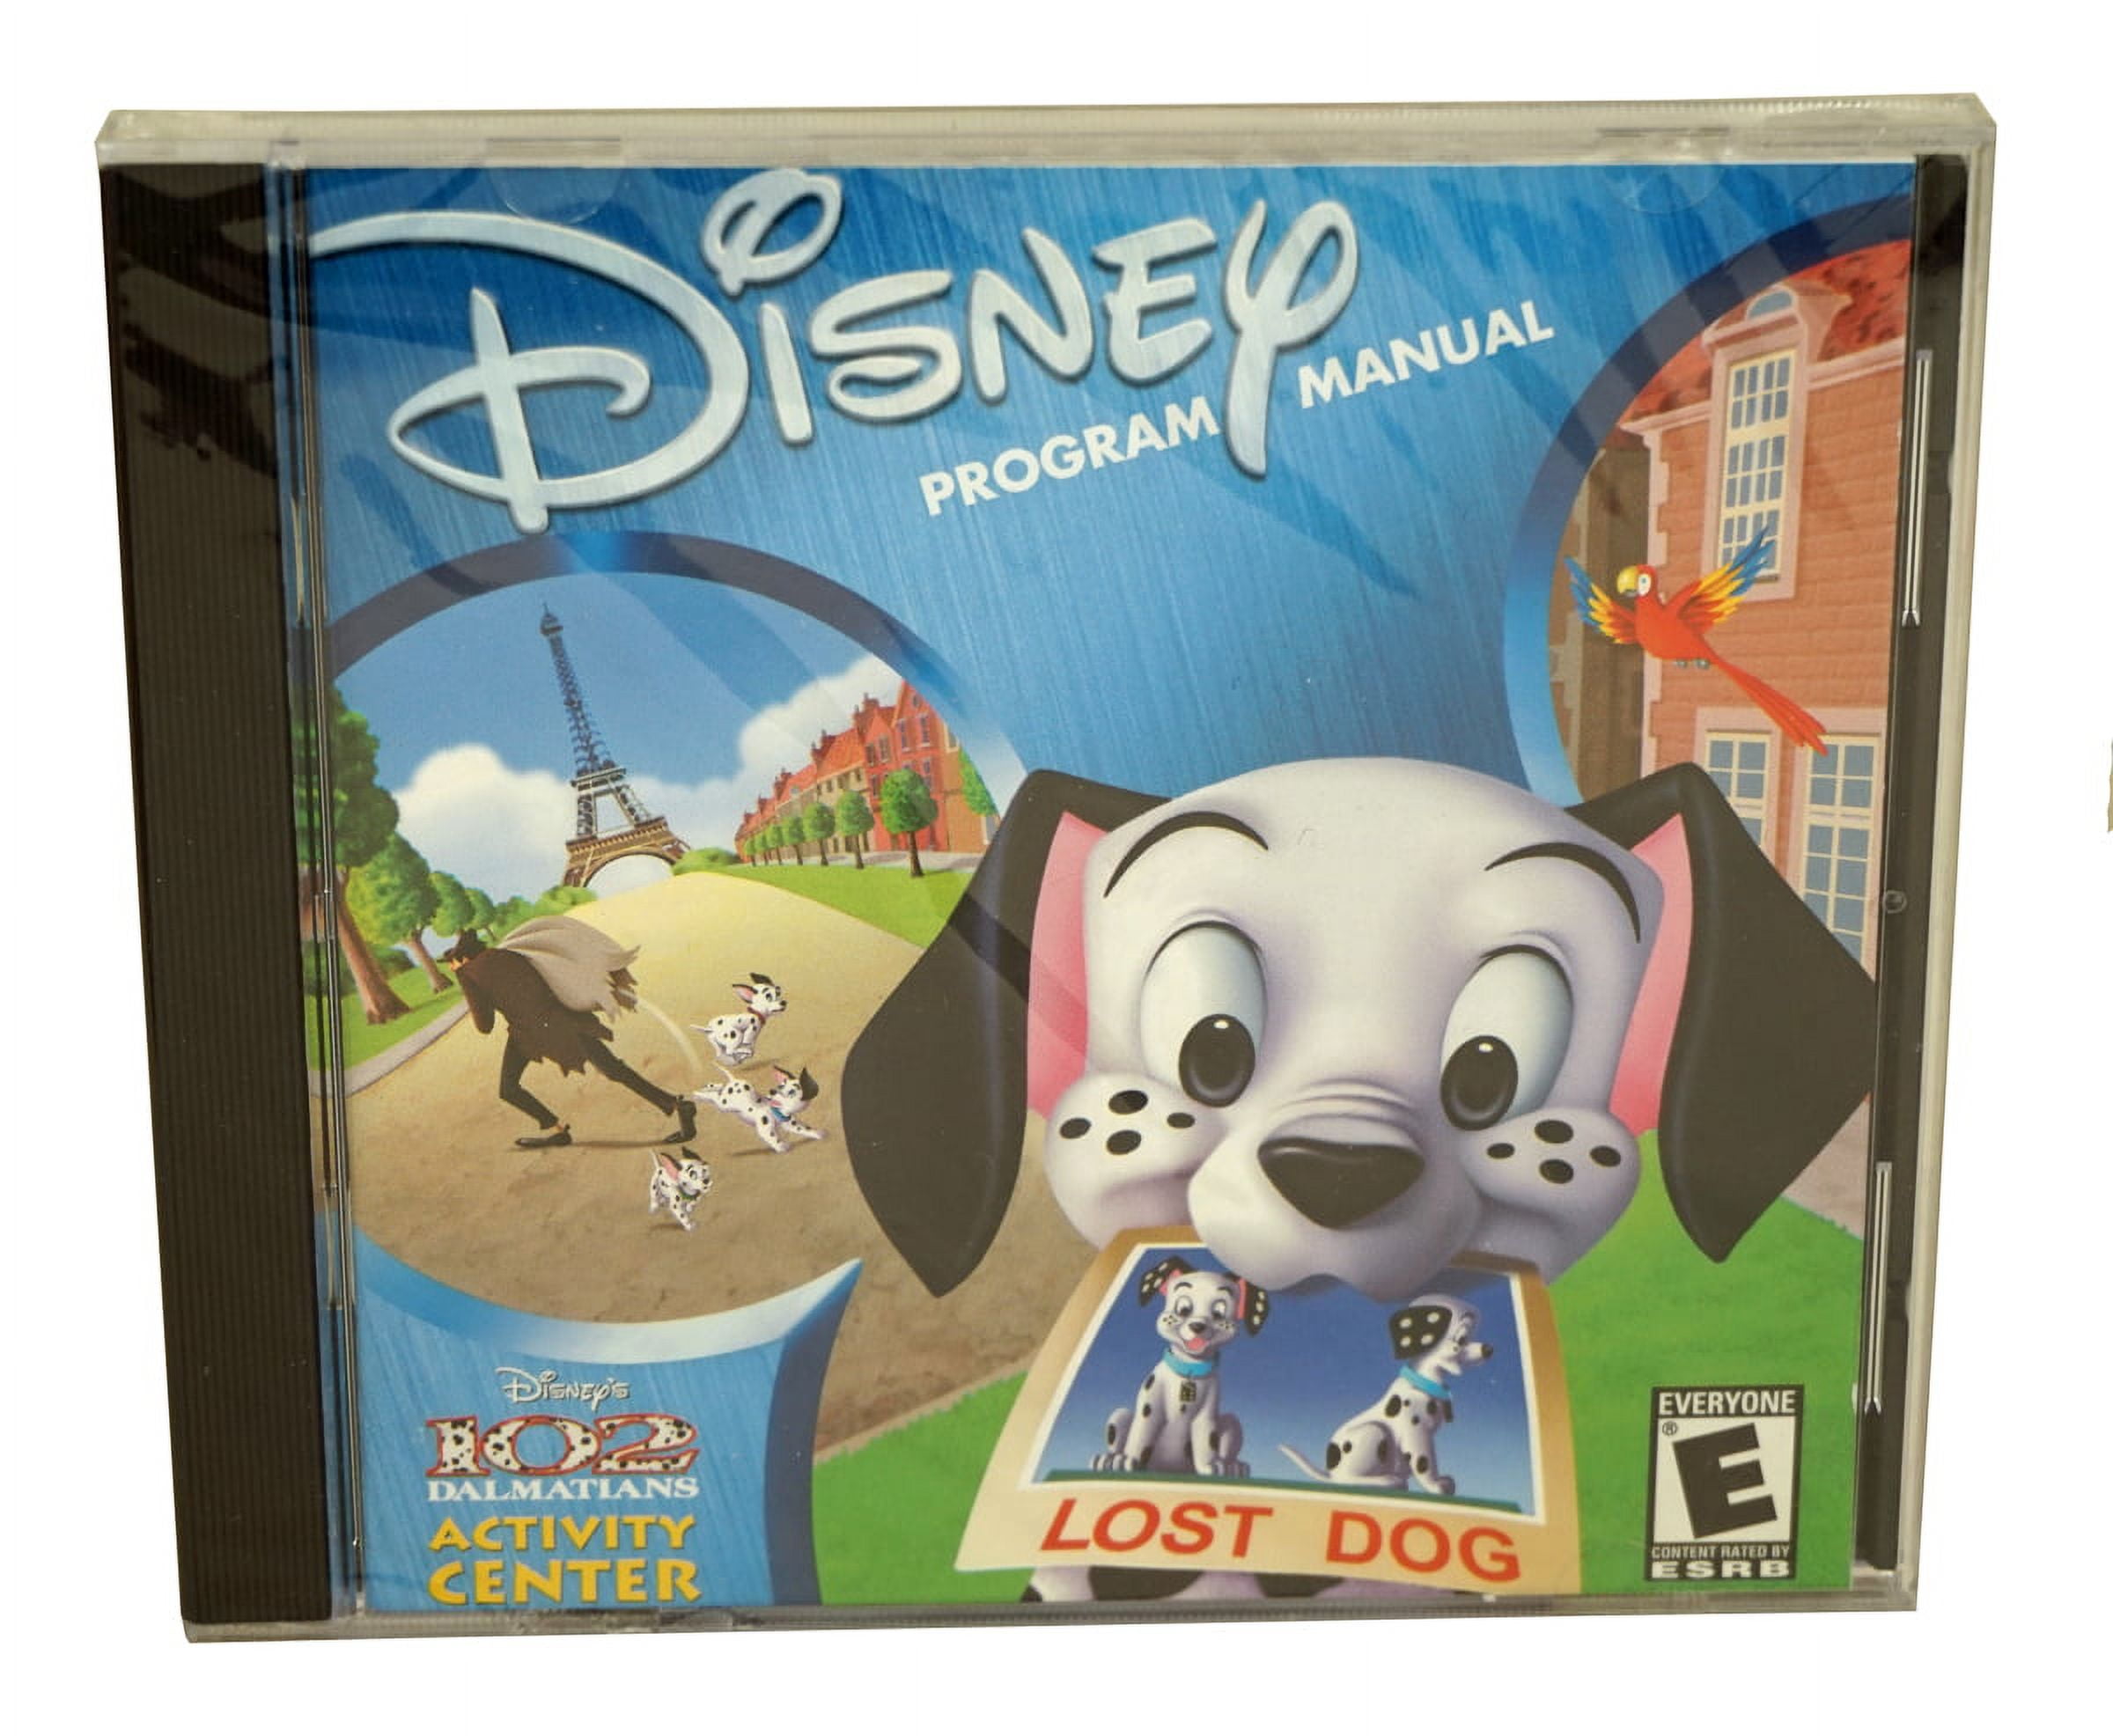 Disney Classic Action Collection of 3 PC Computer Video Games; CD ROM